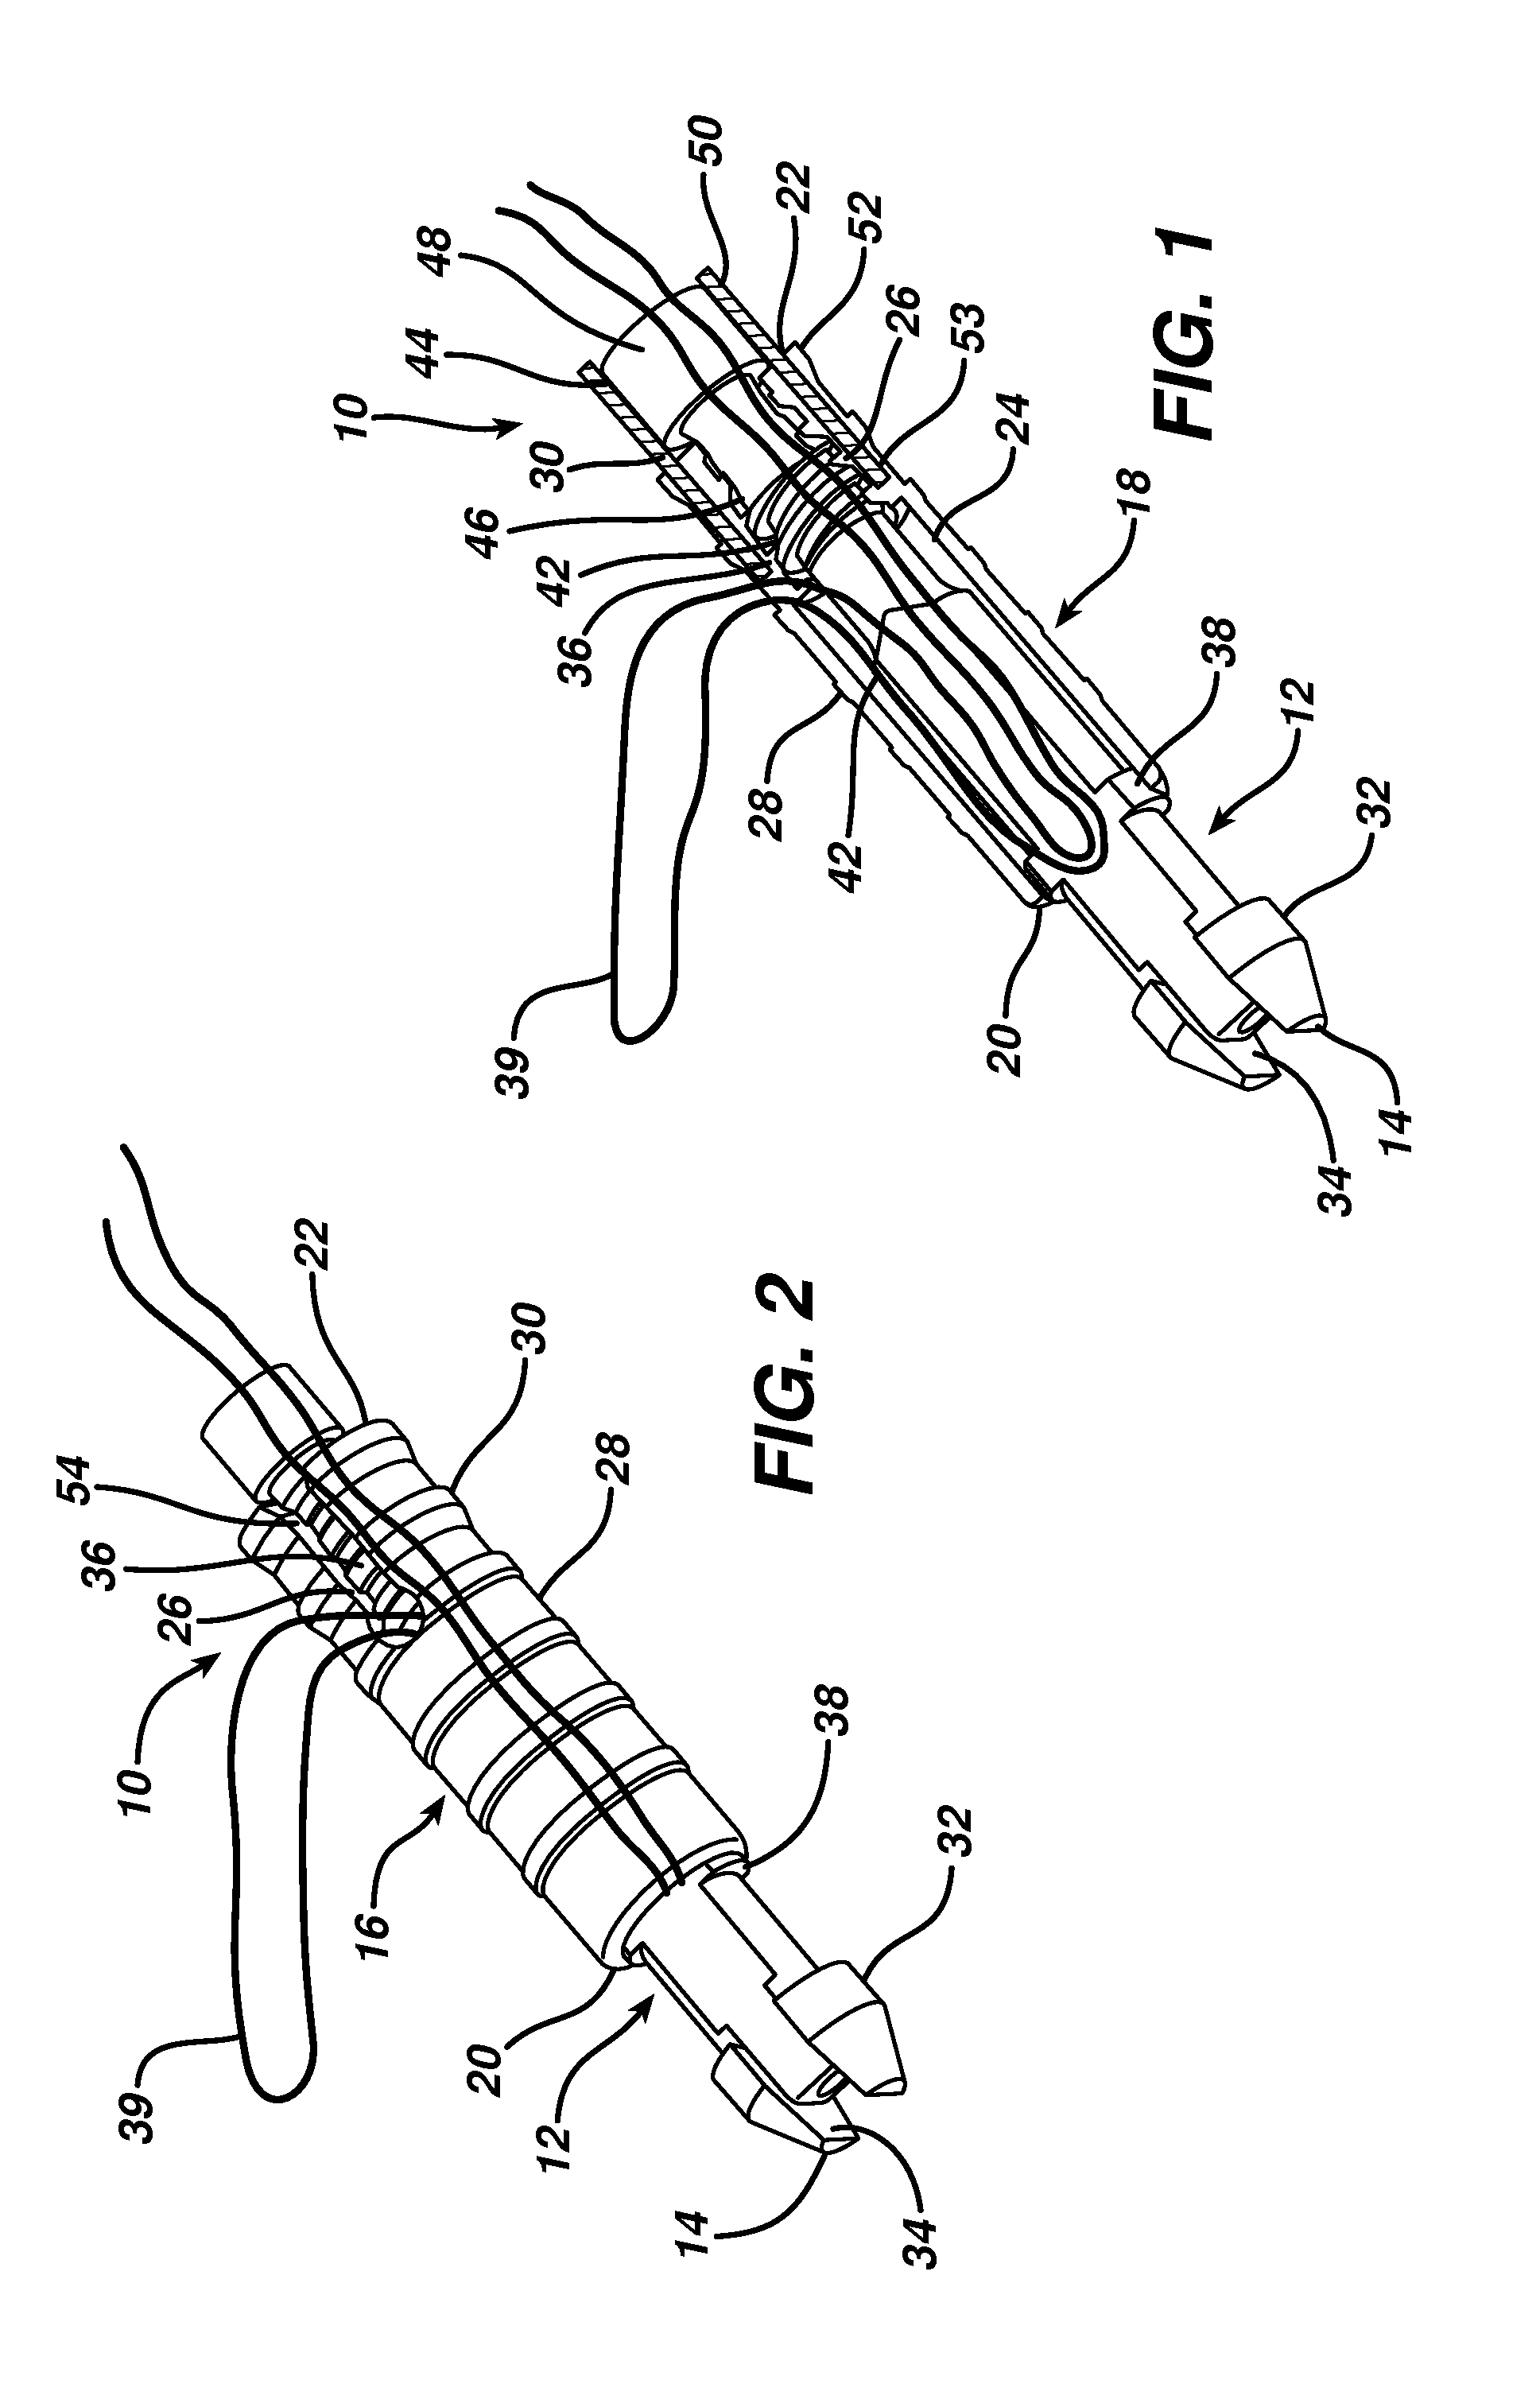 Knotless suture anchor